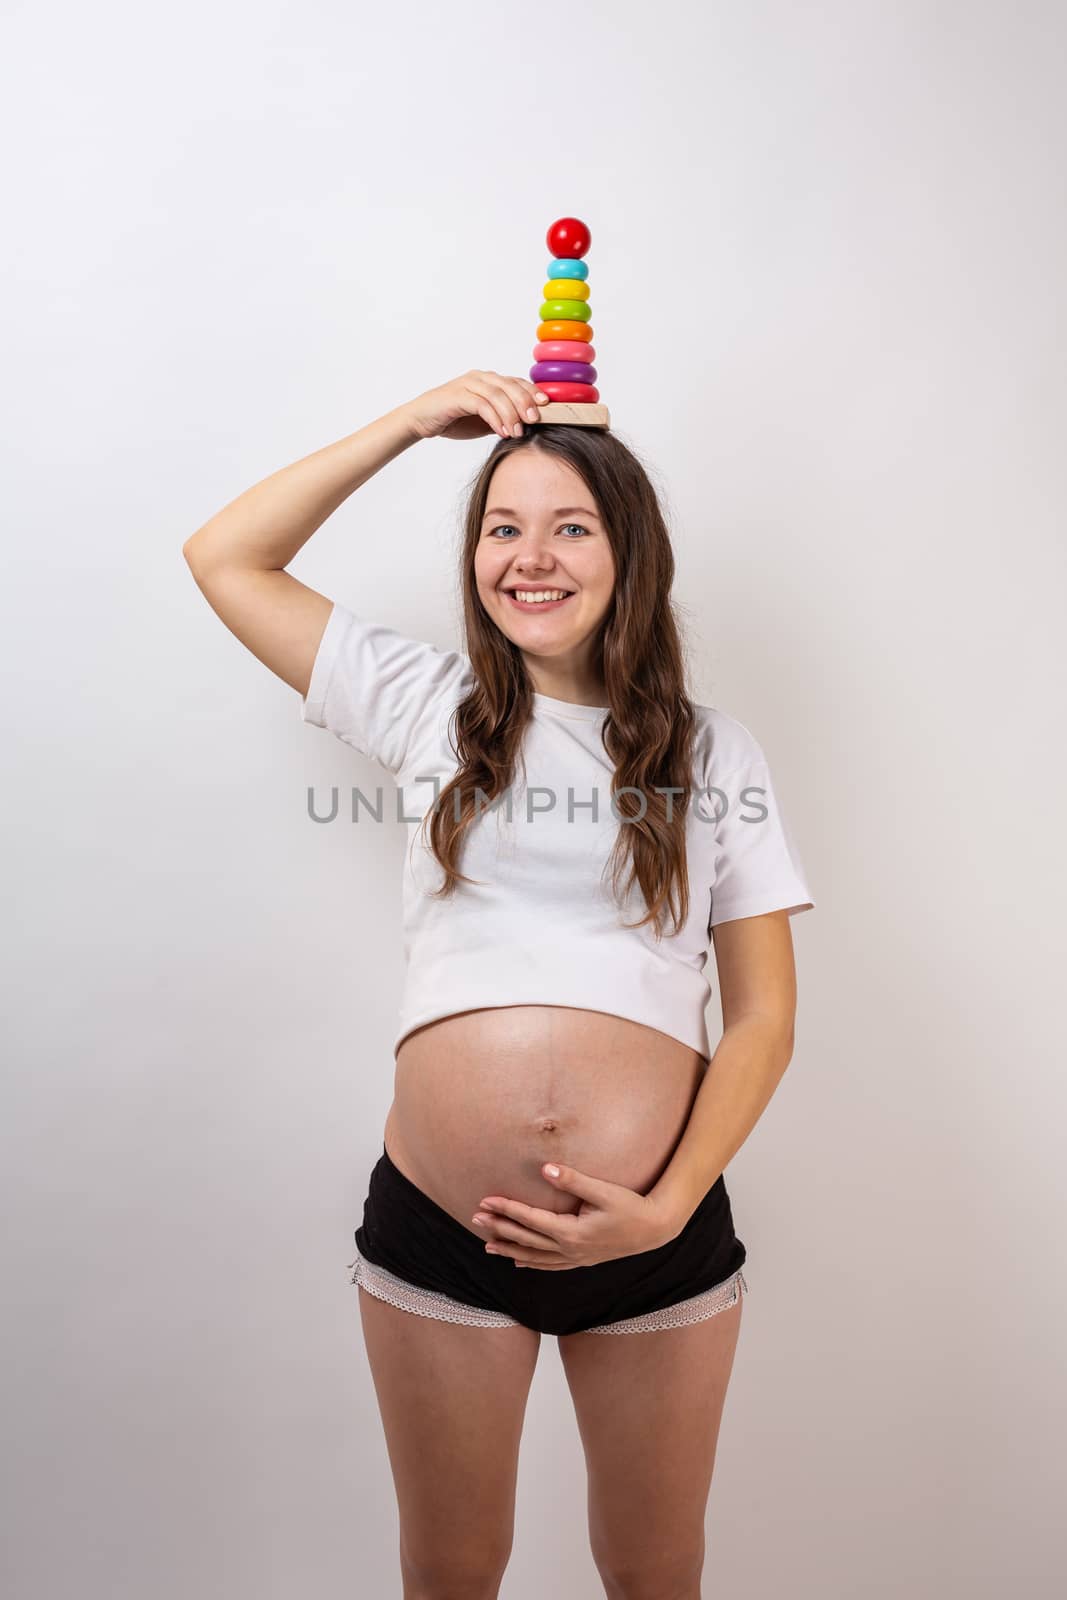 Pregnant girl with a wooden rainbow pyramid for children.